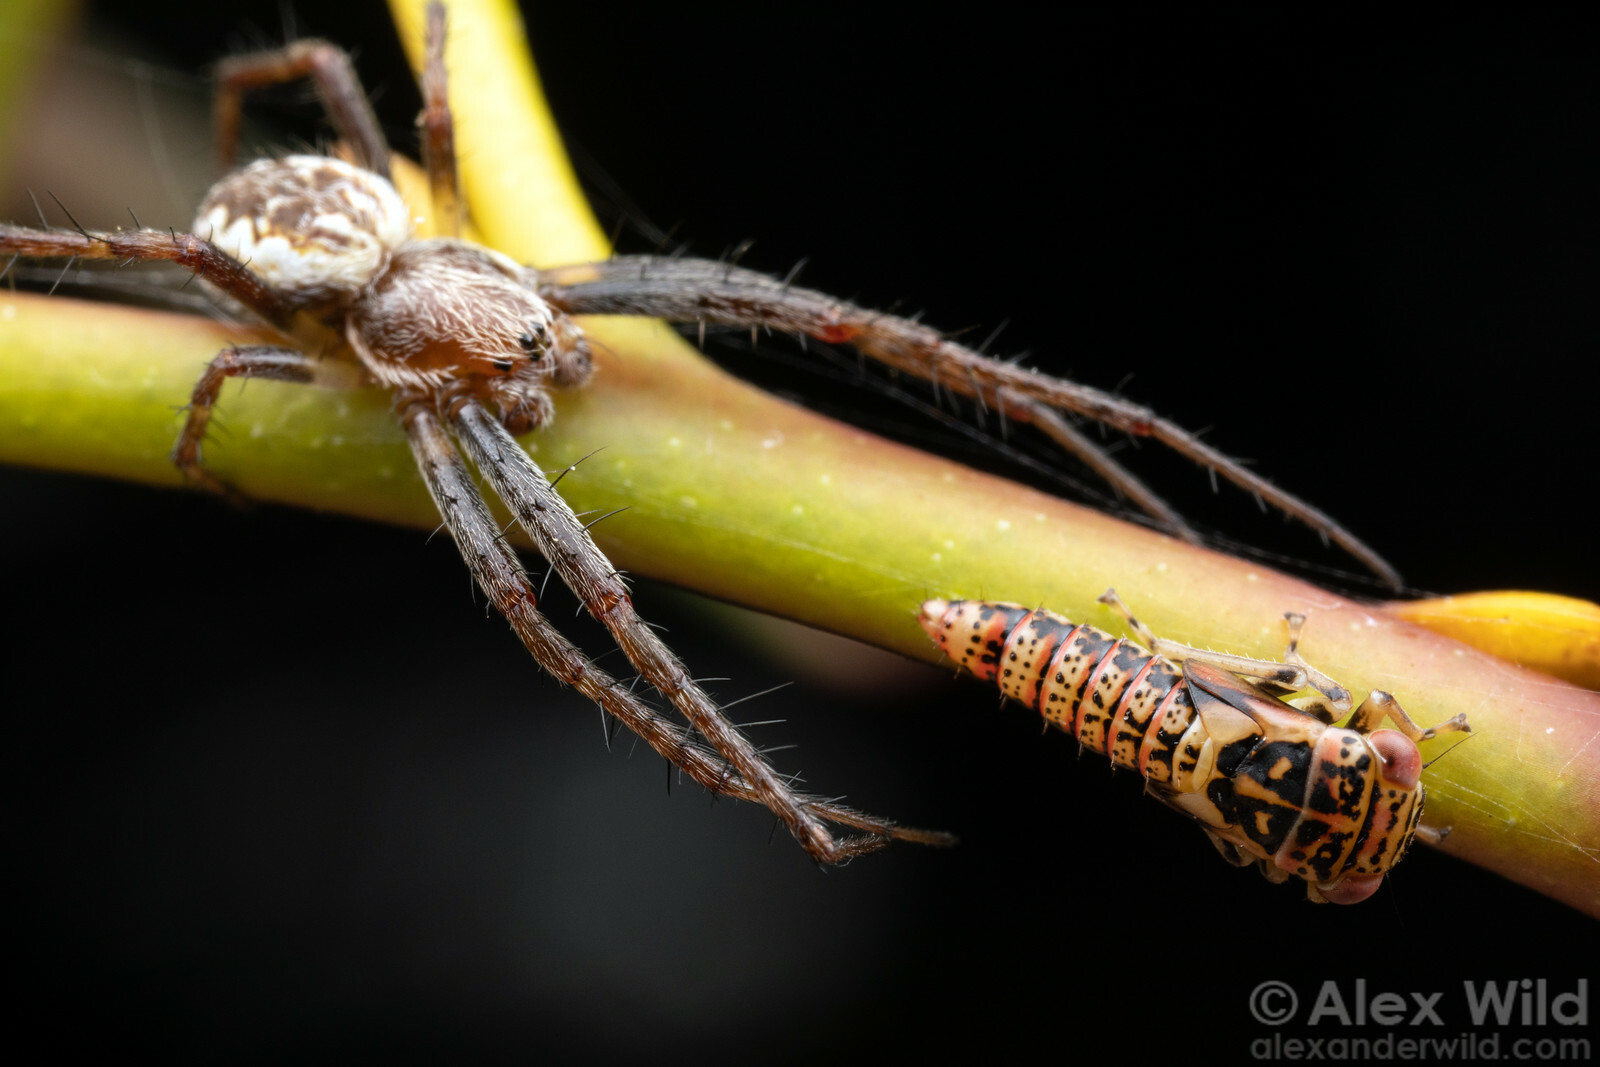 A photograph of a living twig, with a colorful bug nymph in the lower-right foreground, nearly in the embrace of a hairy long-legged spider in the upper-left background.